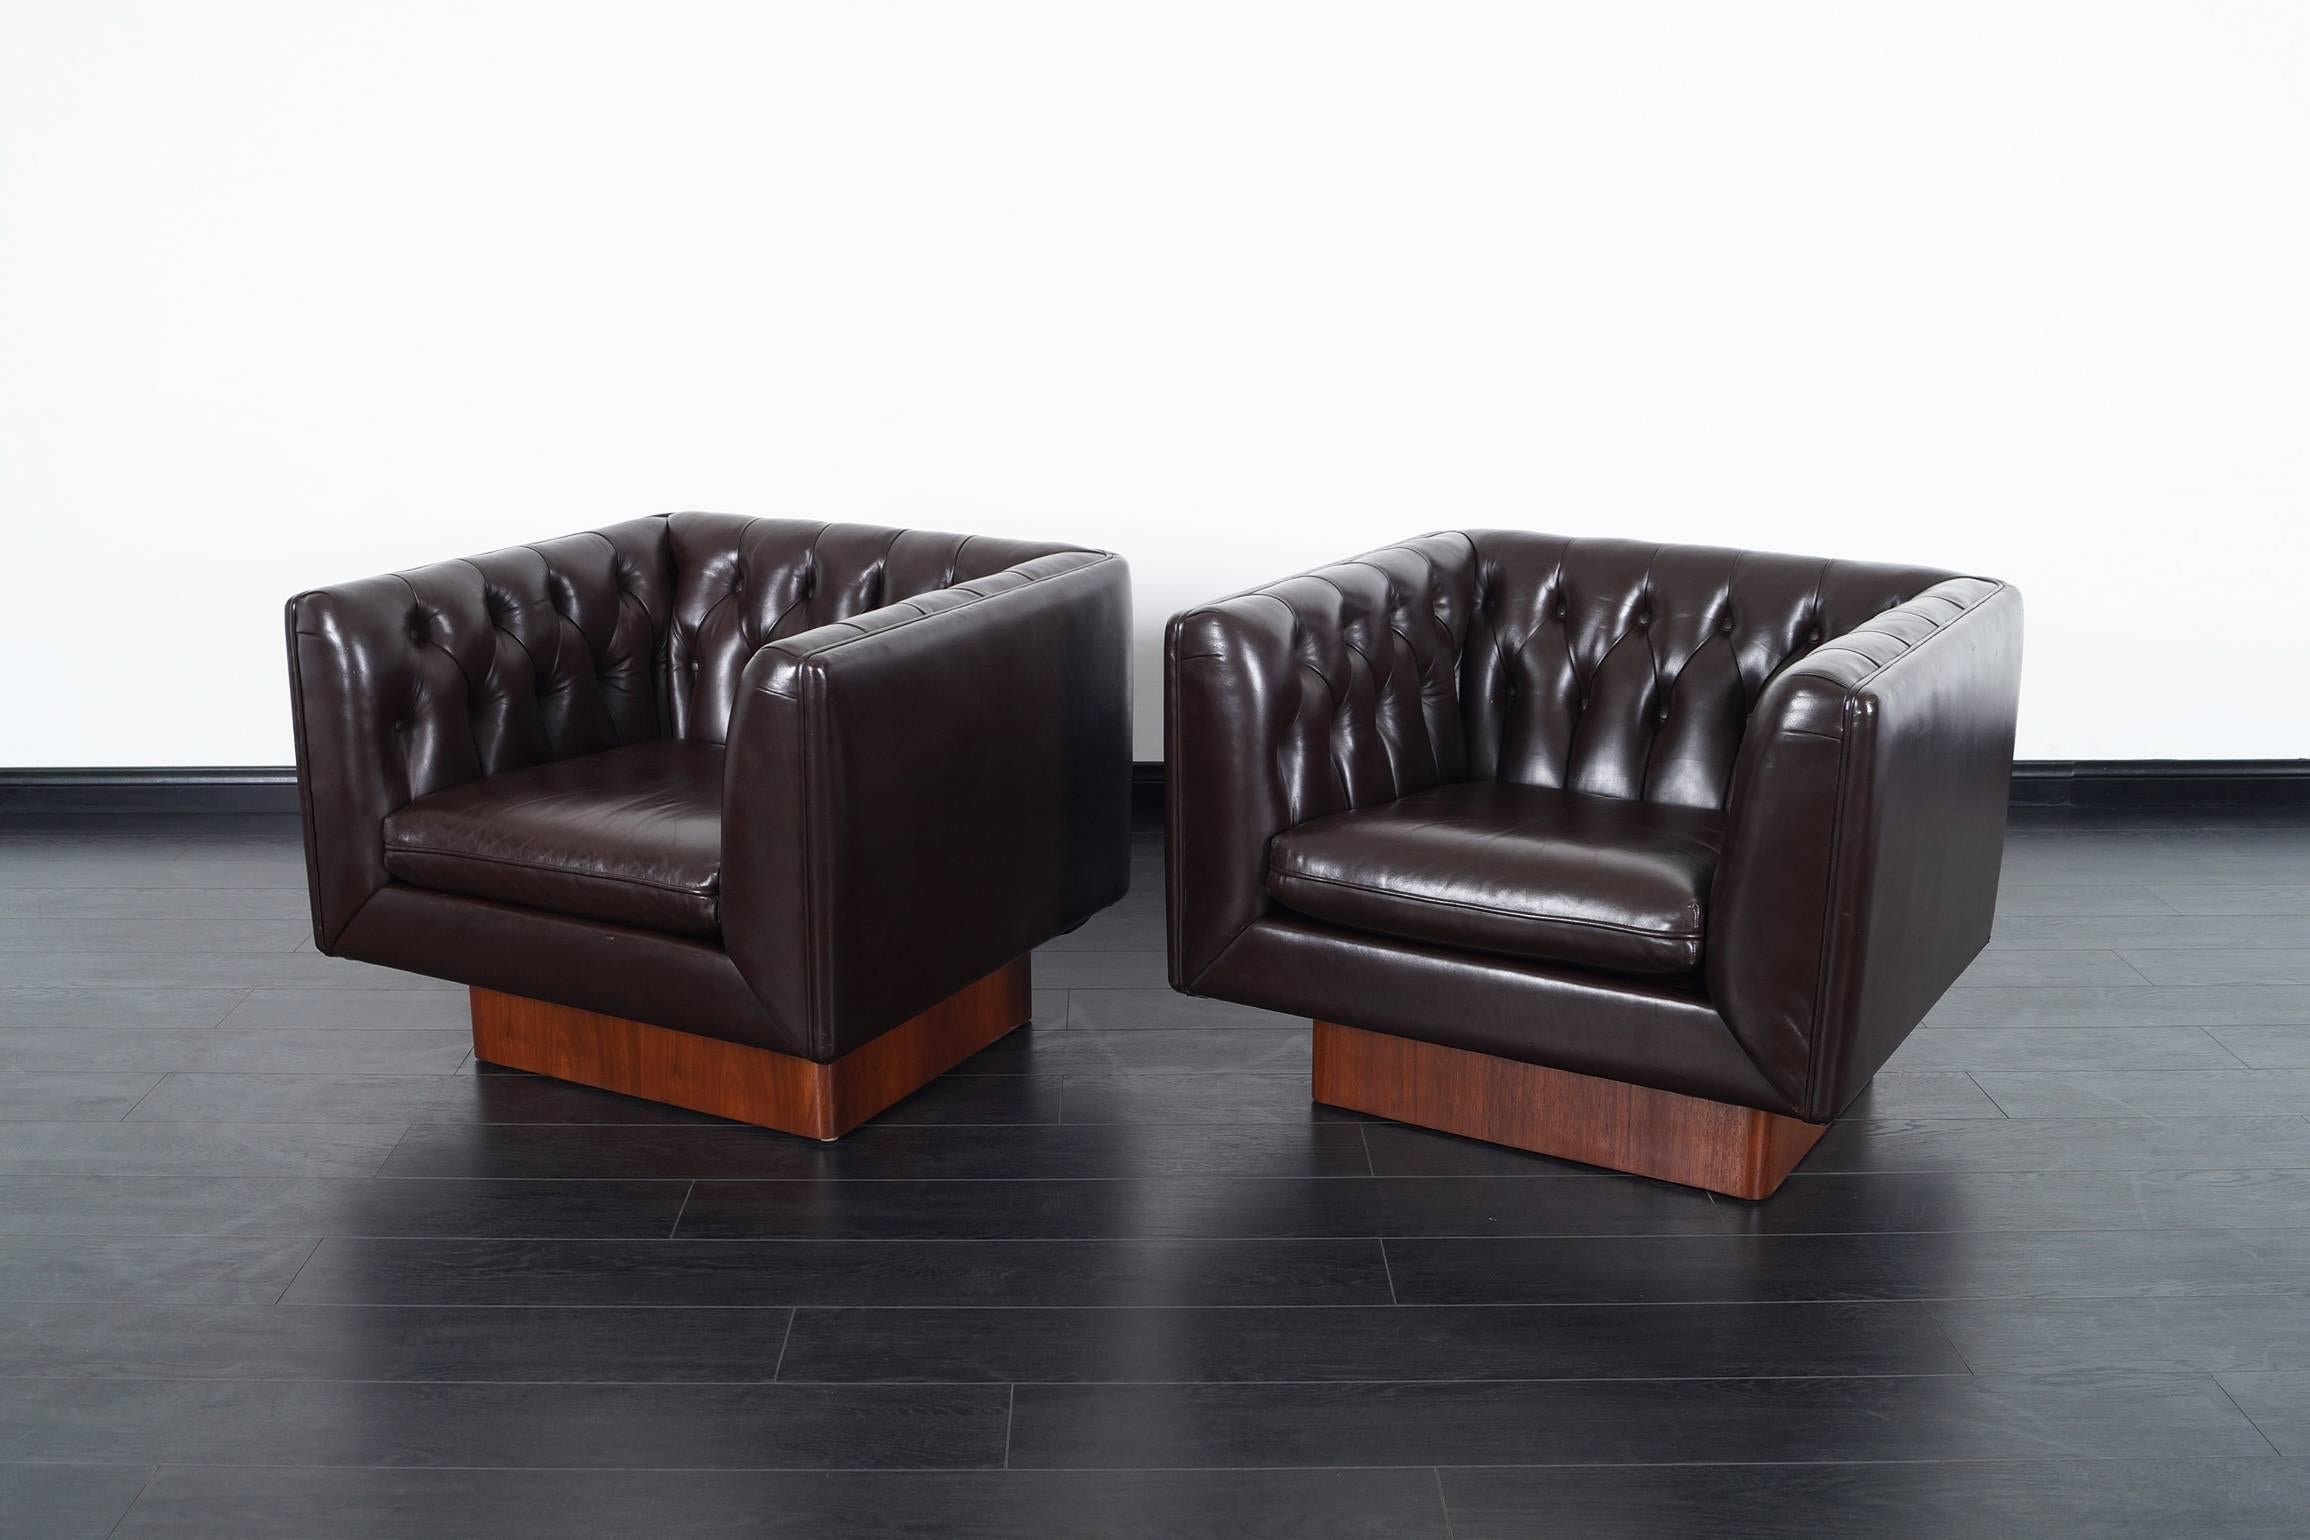 Mid-20th Century Vintage Tufted Leather Lounge Chairs by Milo Baughman